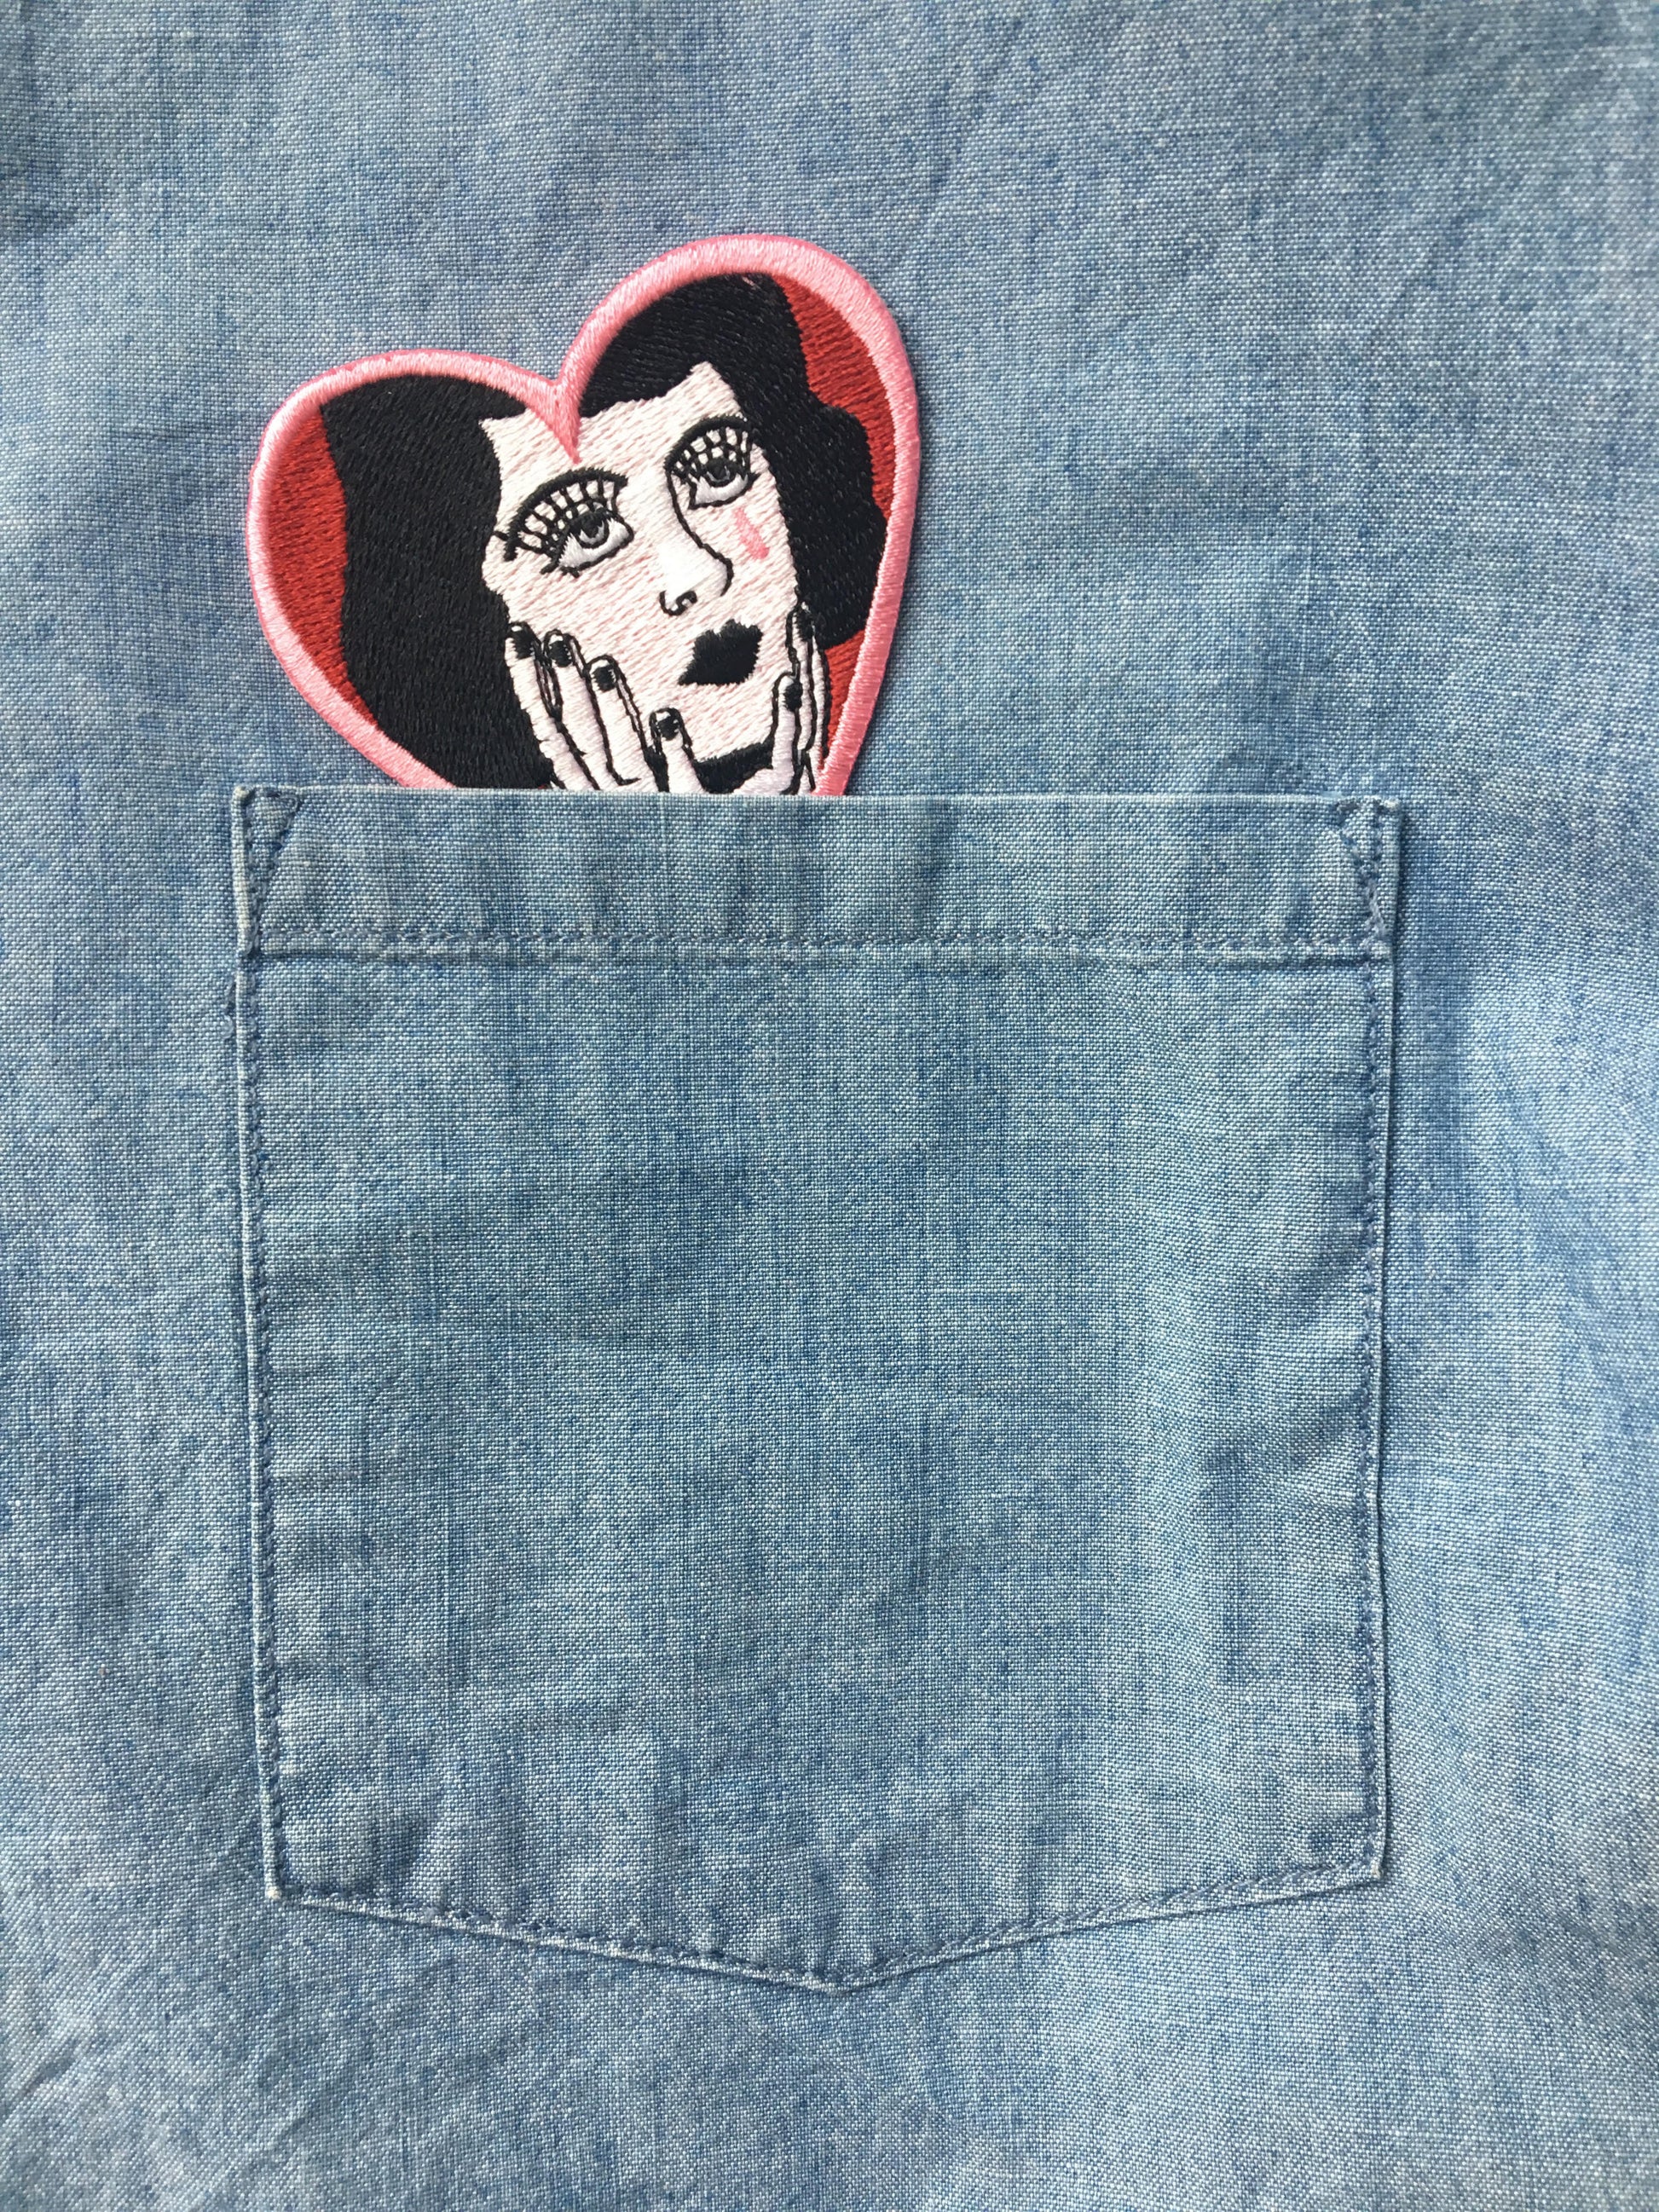 Cry lady, Iron on, patch, heart shape patch, illustration, gift, etsy, love patch